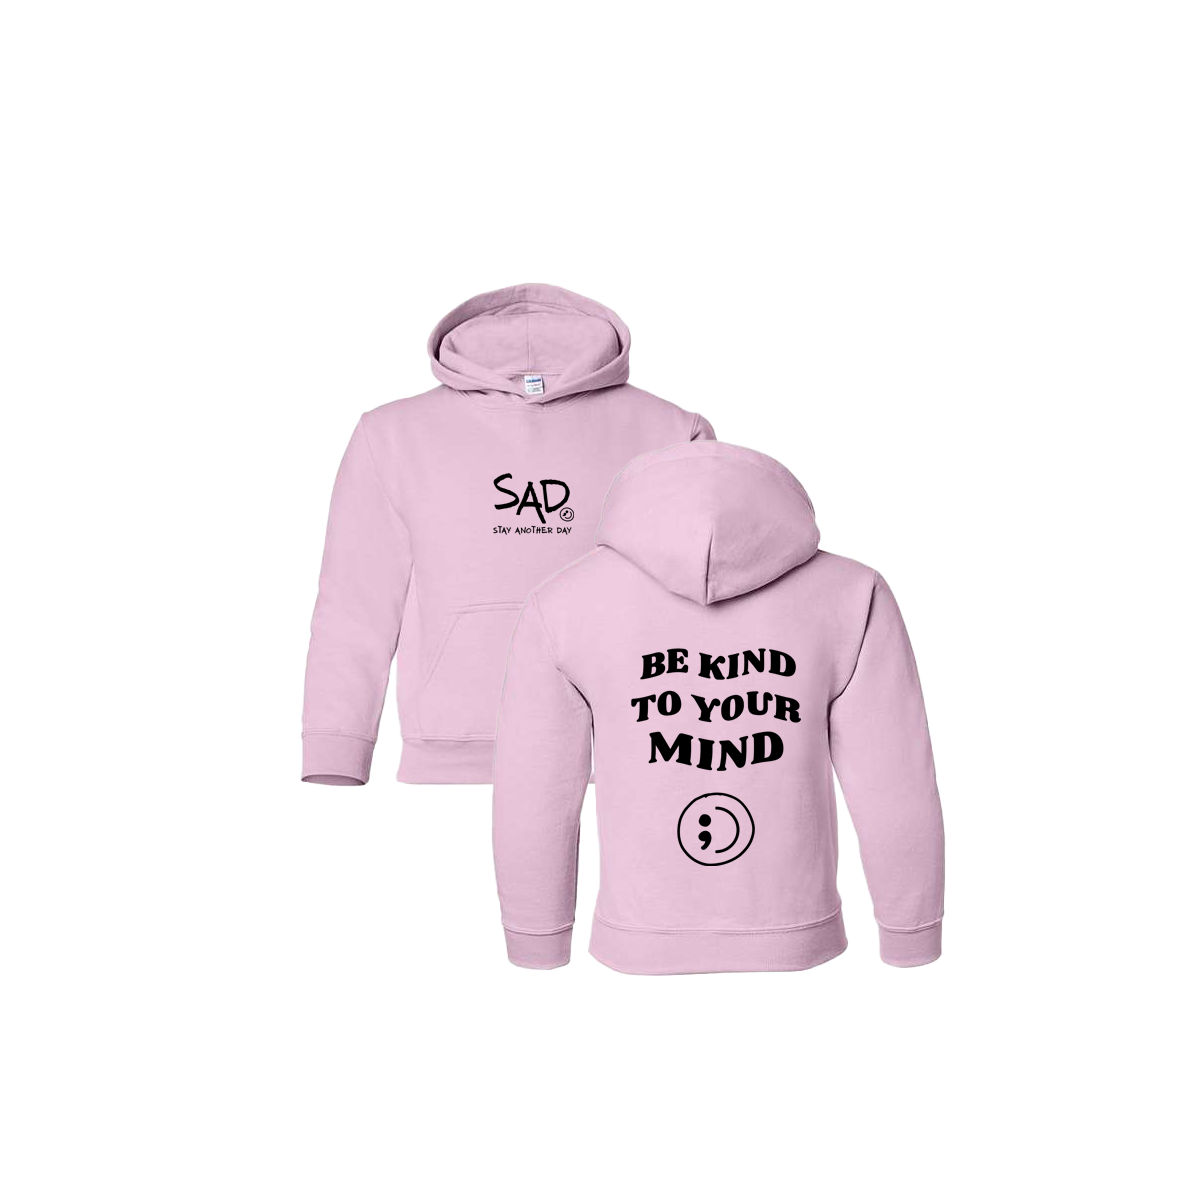 Be Kind To Your Mind Screen Printed Light Pink Youth Hoodie